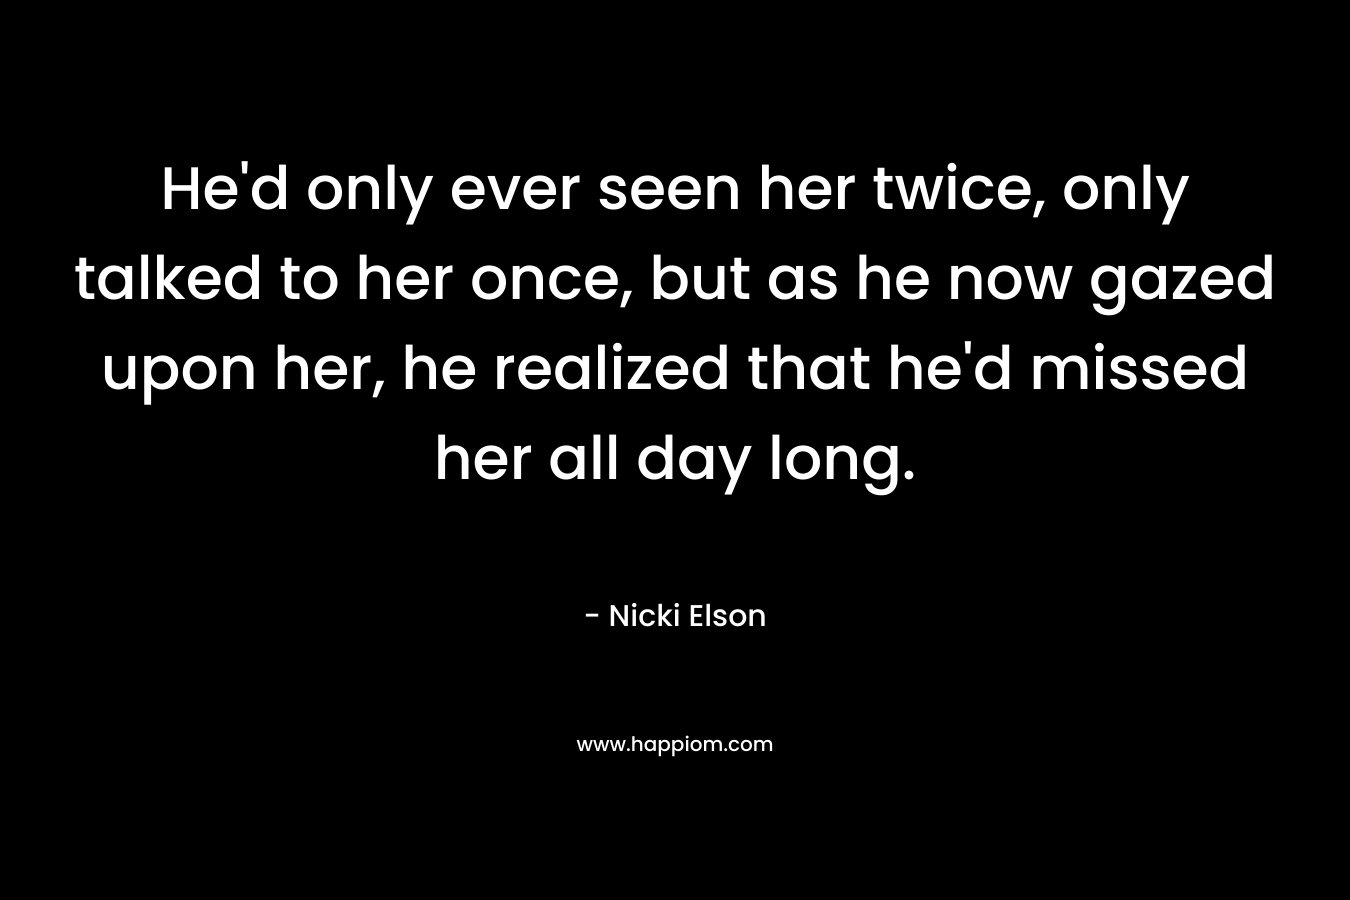 He’d only ever seen her twice, only talked to her once, but as he now gazed upon her, he realized that he’d missed her all day long. – Nicki Elson